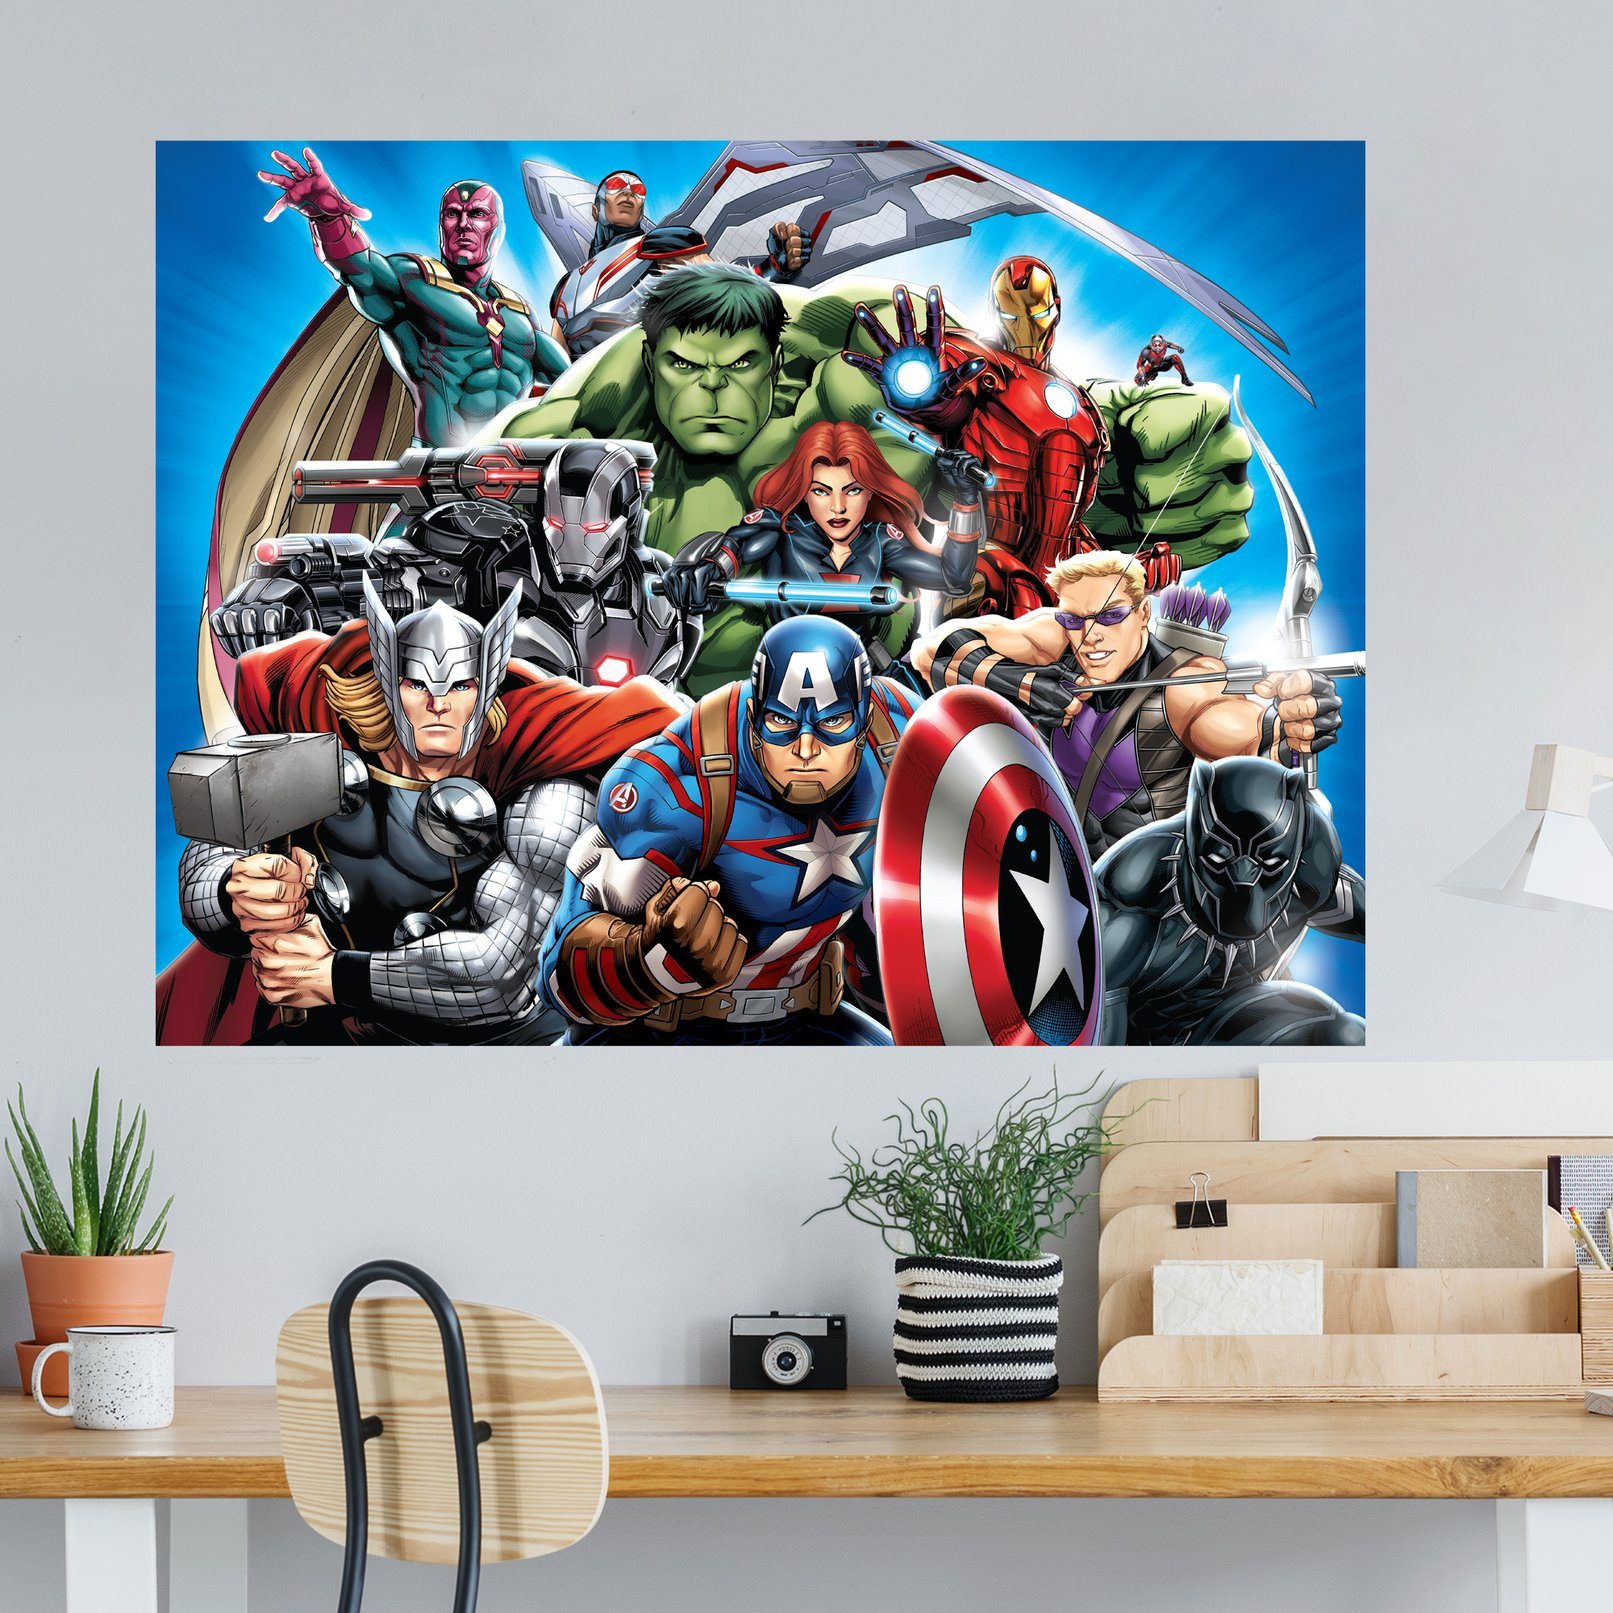 https://fathead.com/collections/superheroes/products/96-96290?variant=33244150431832